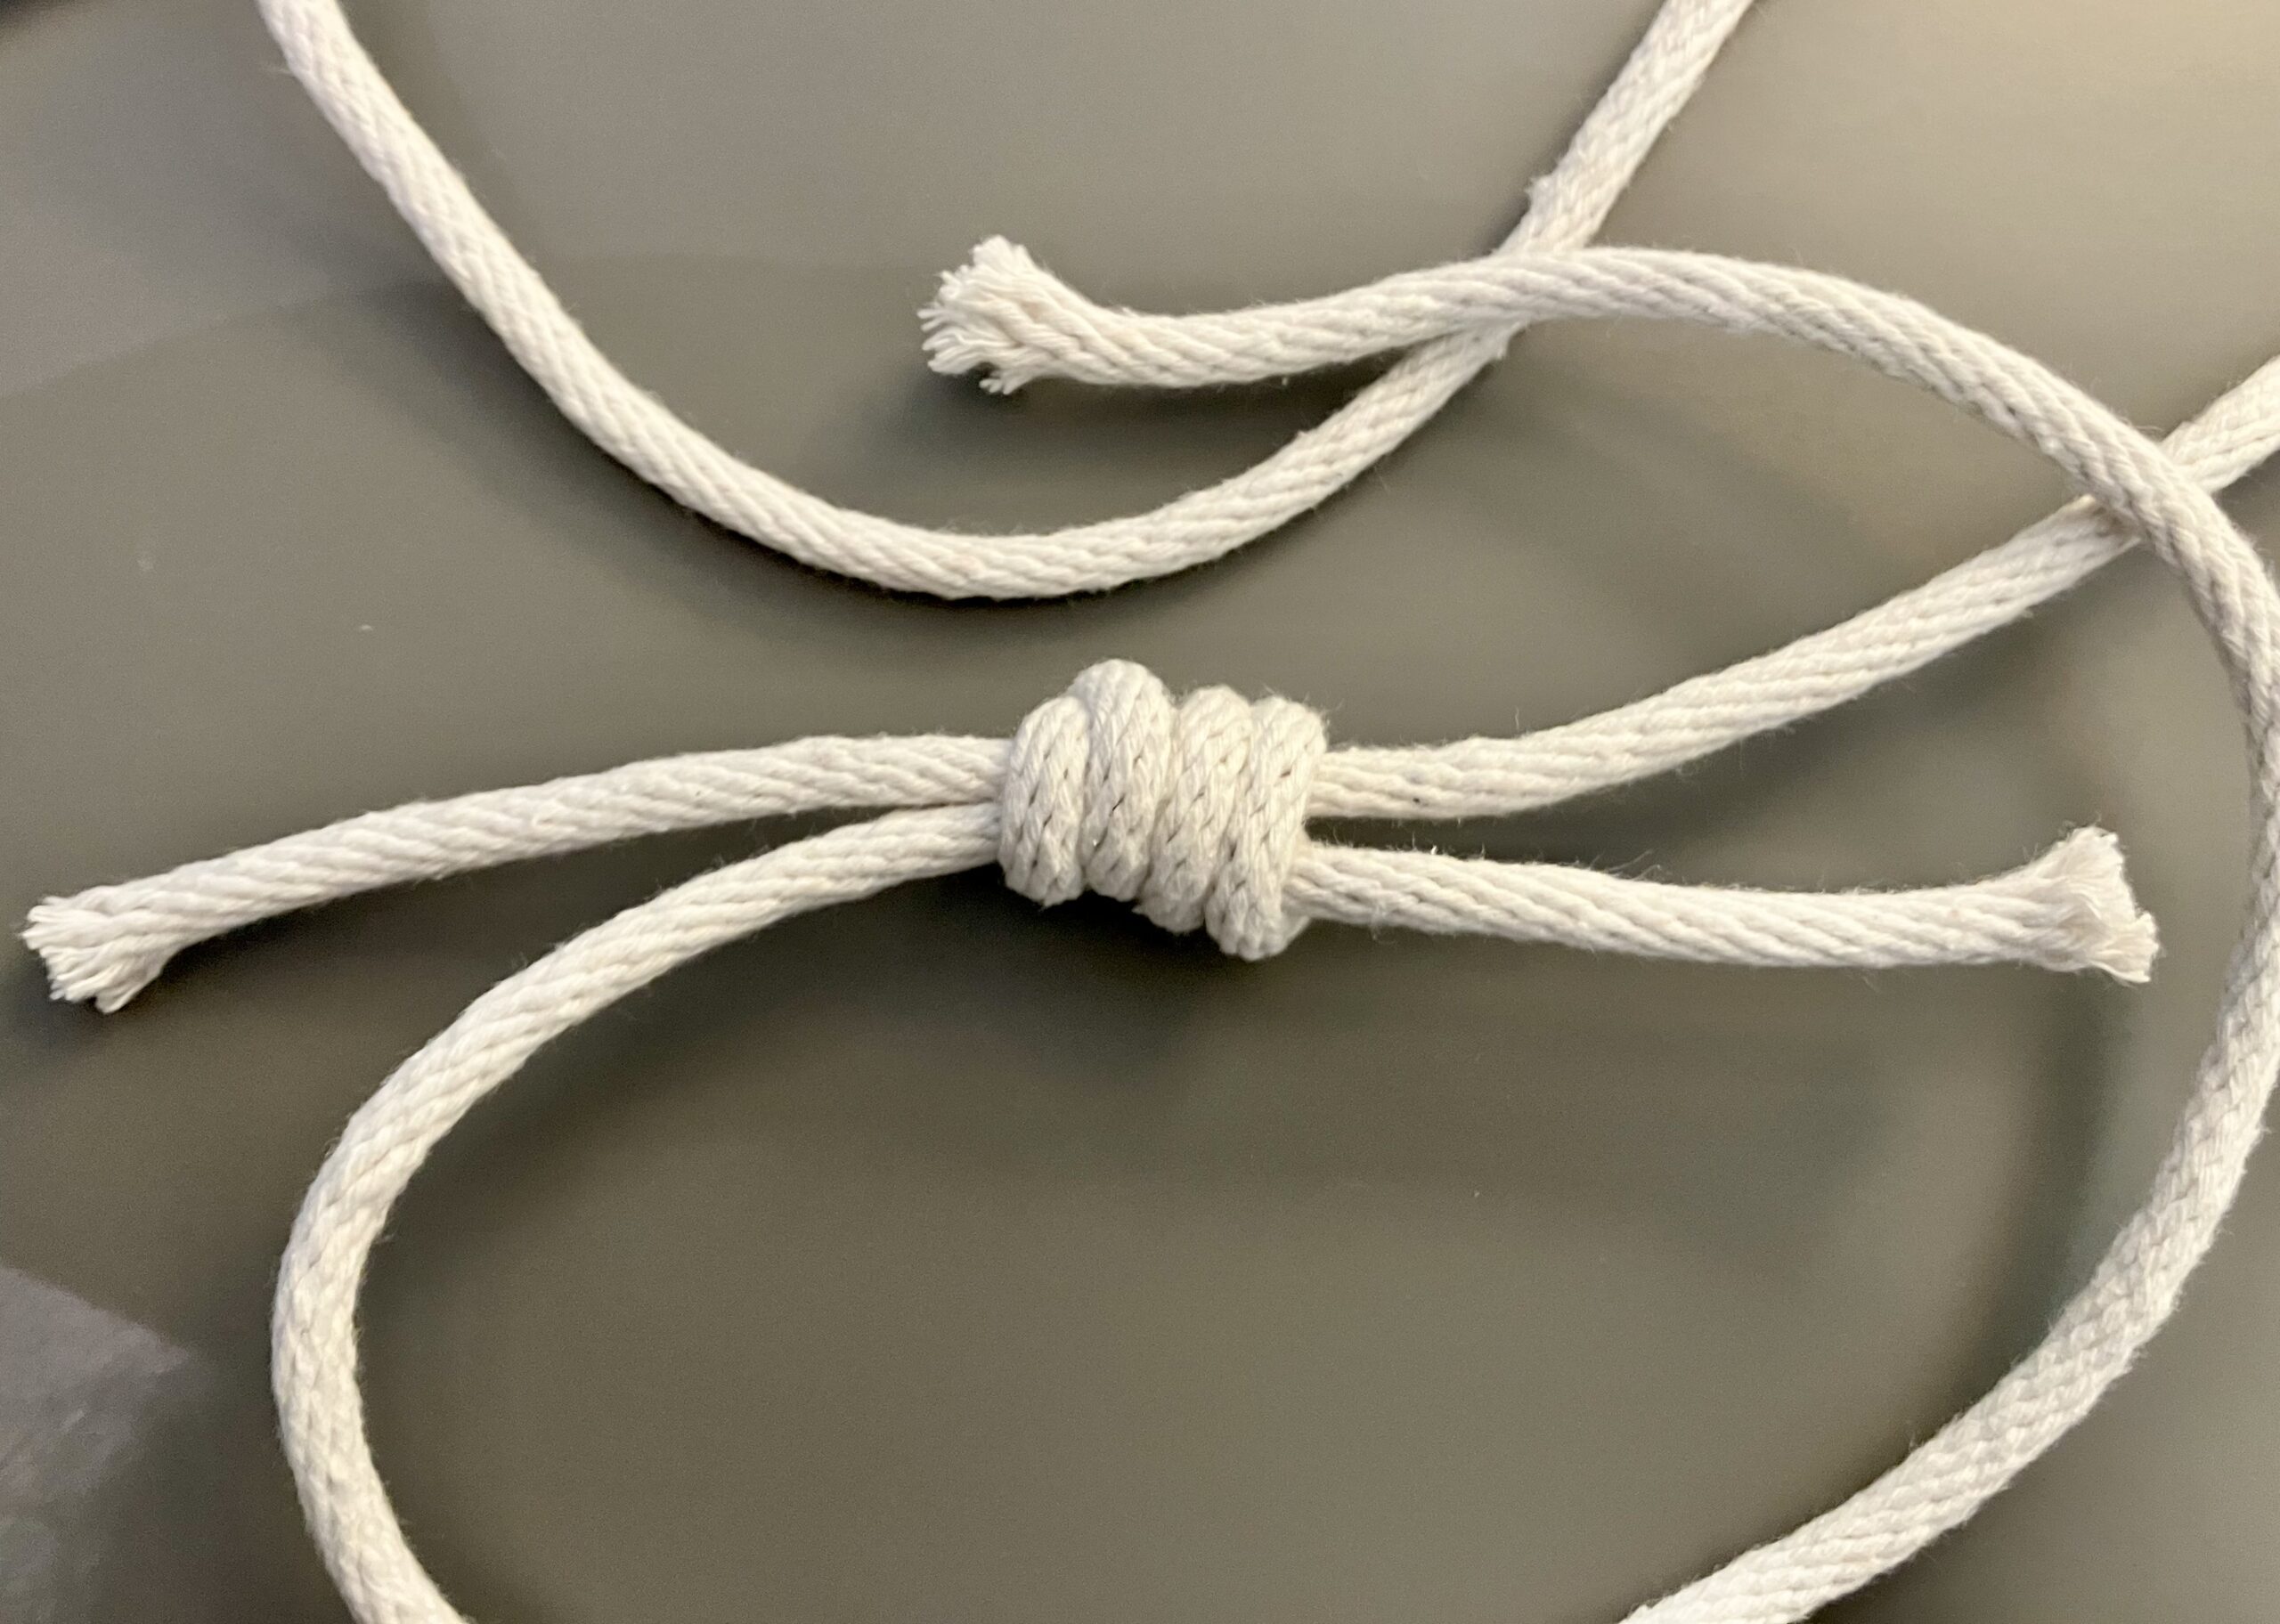 White rope is tied into a double fisherman's knot